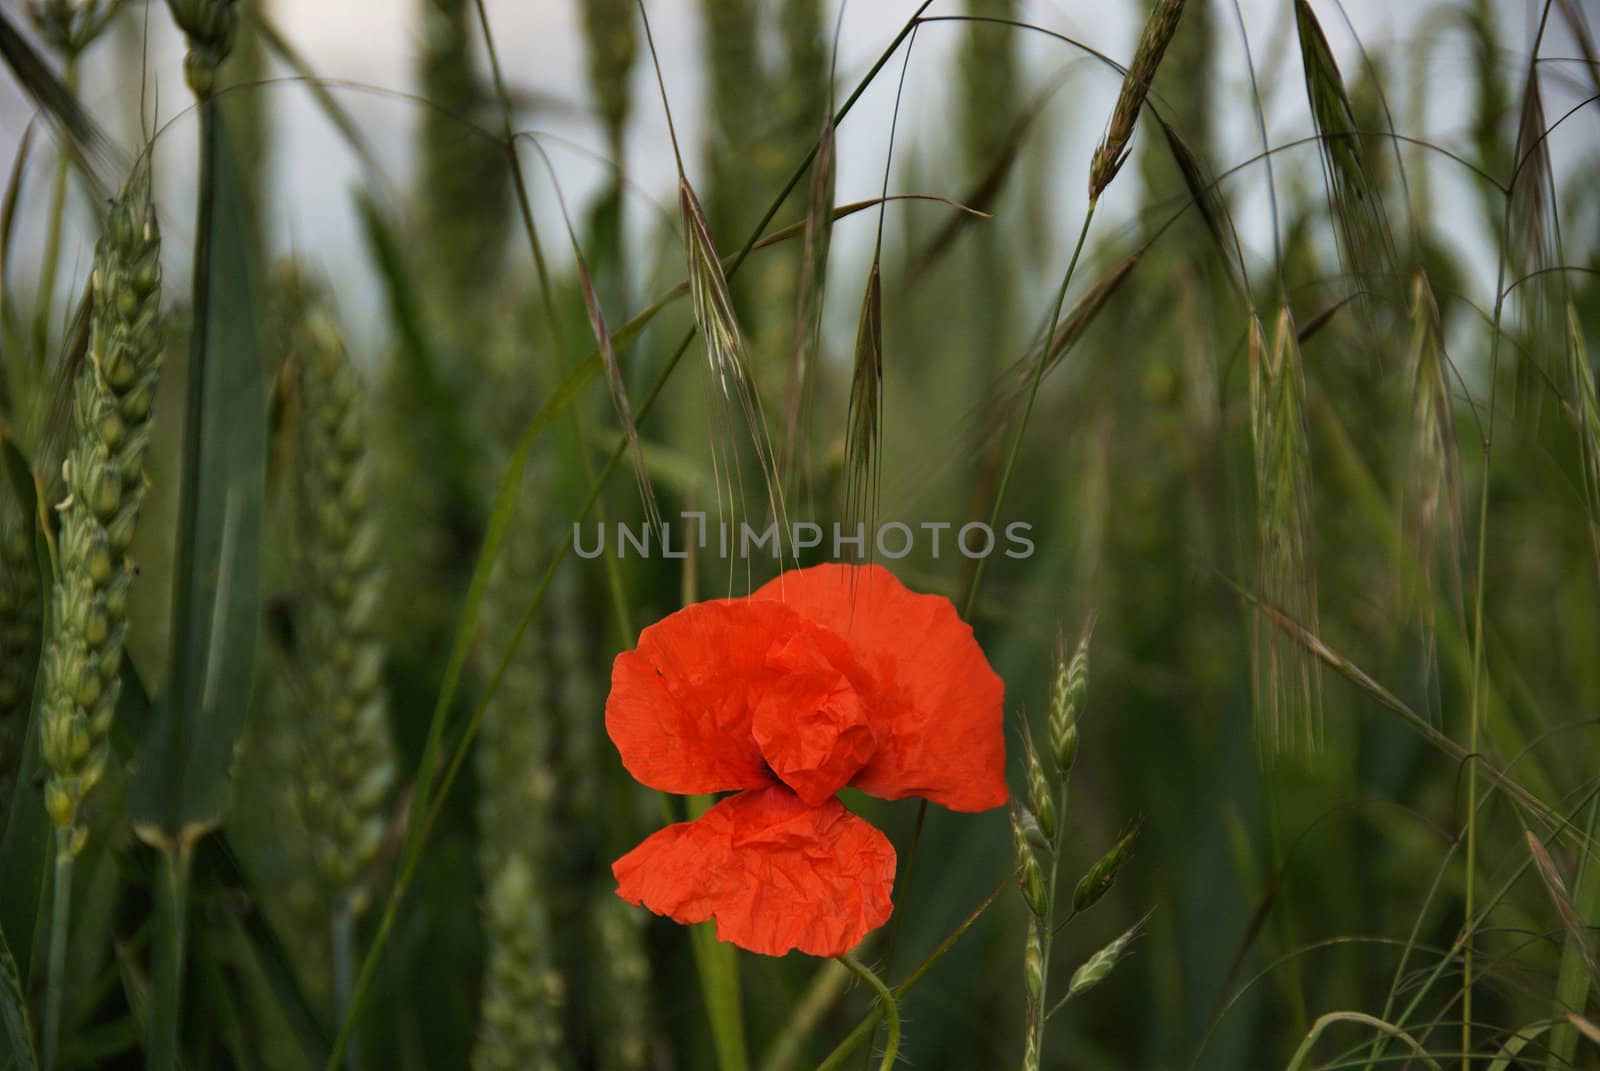 A single Poppy and wild grasses at the edge of a wheat field in Kent,UK